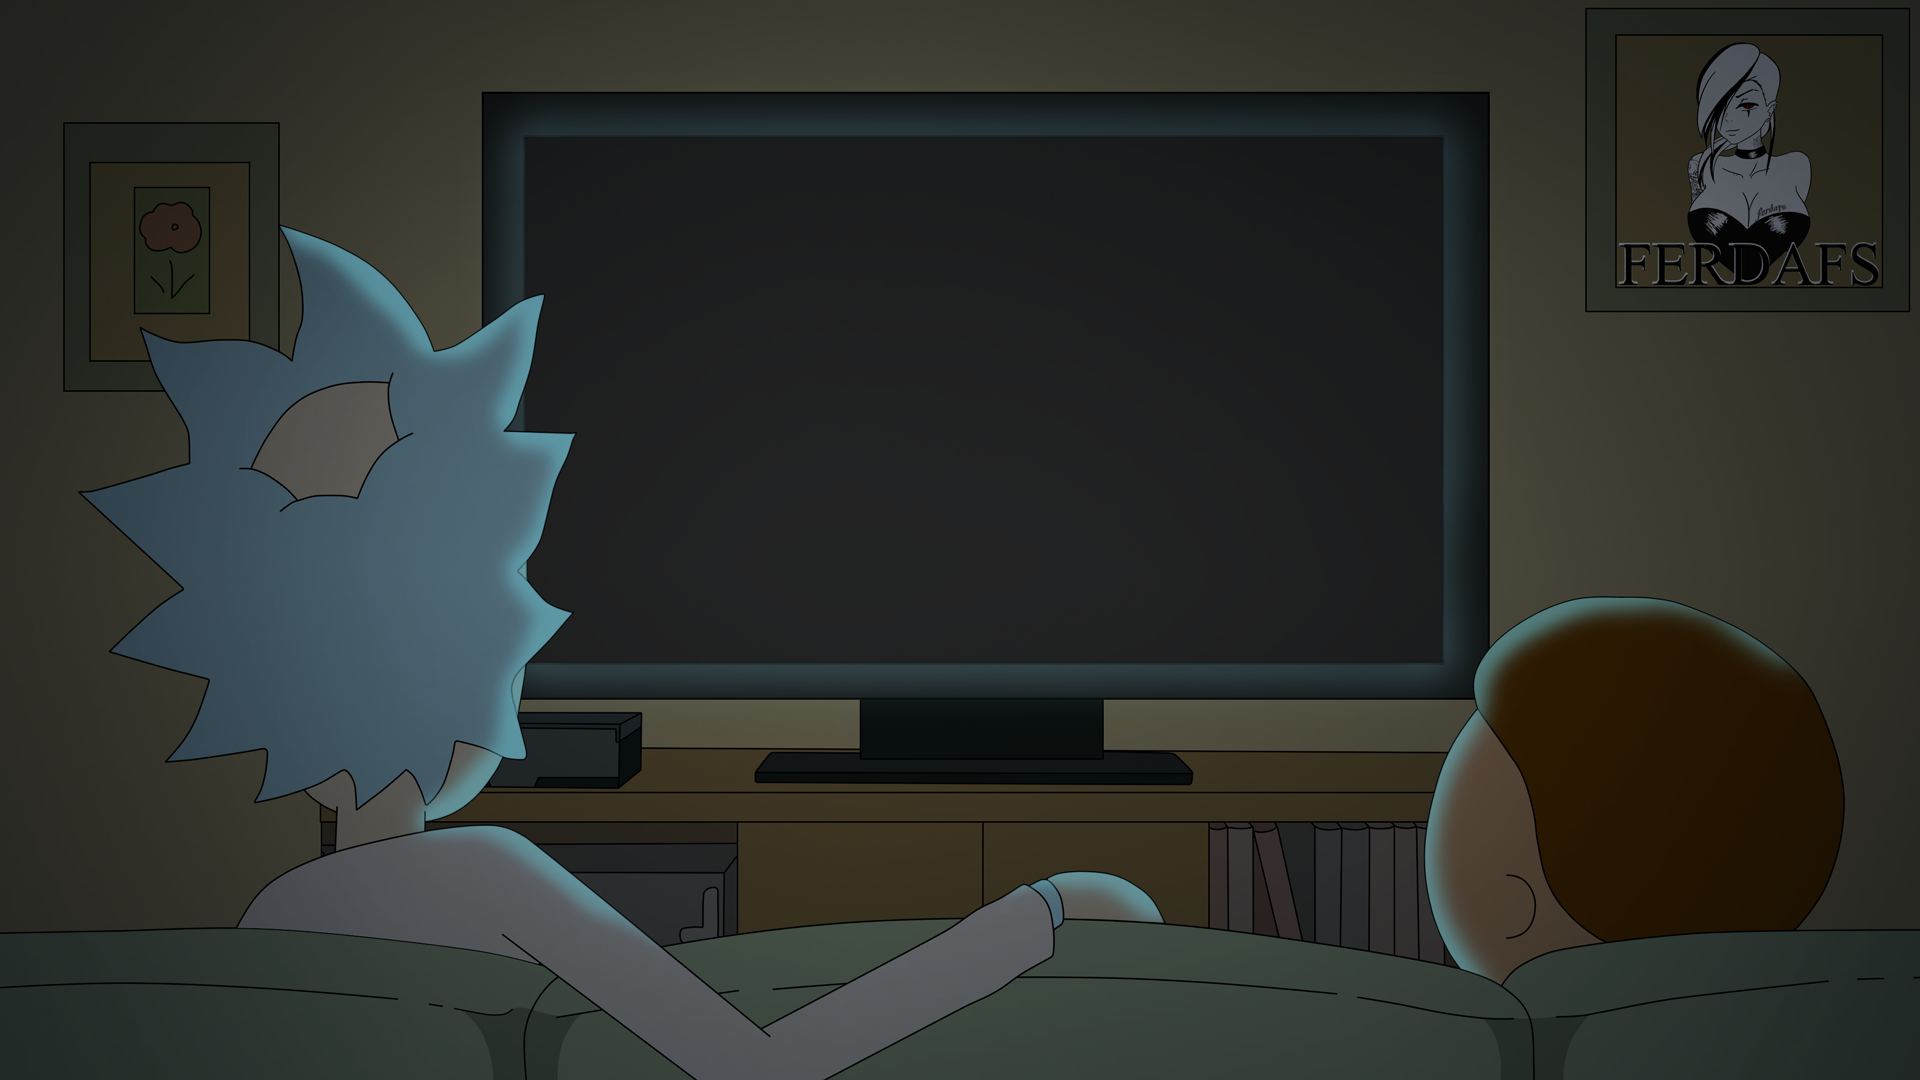 Way back when. Rick and Morty - a way back Home [ferdafs]. Back Home. Rick and Morty a way back Home прохождение. Back Home 2 игра.